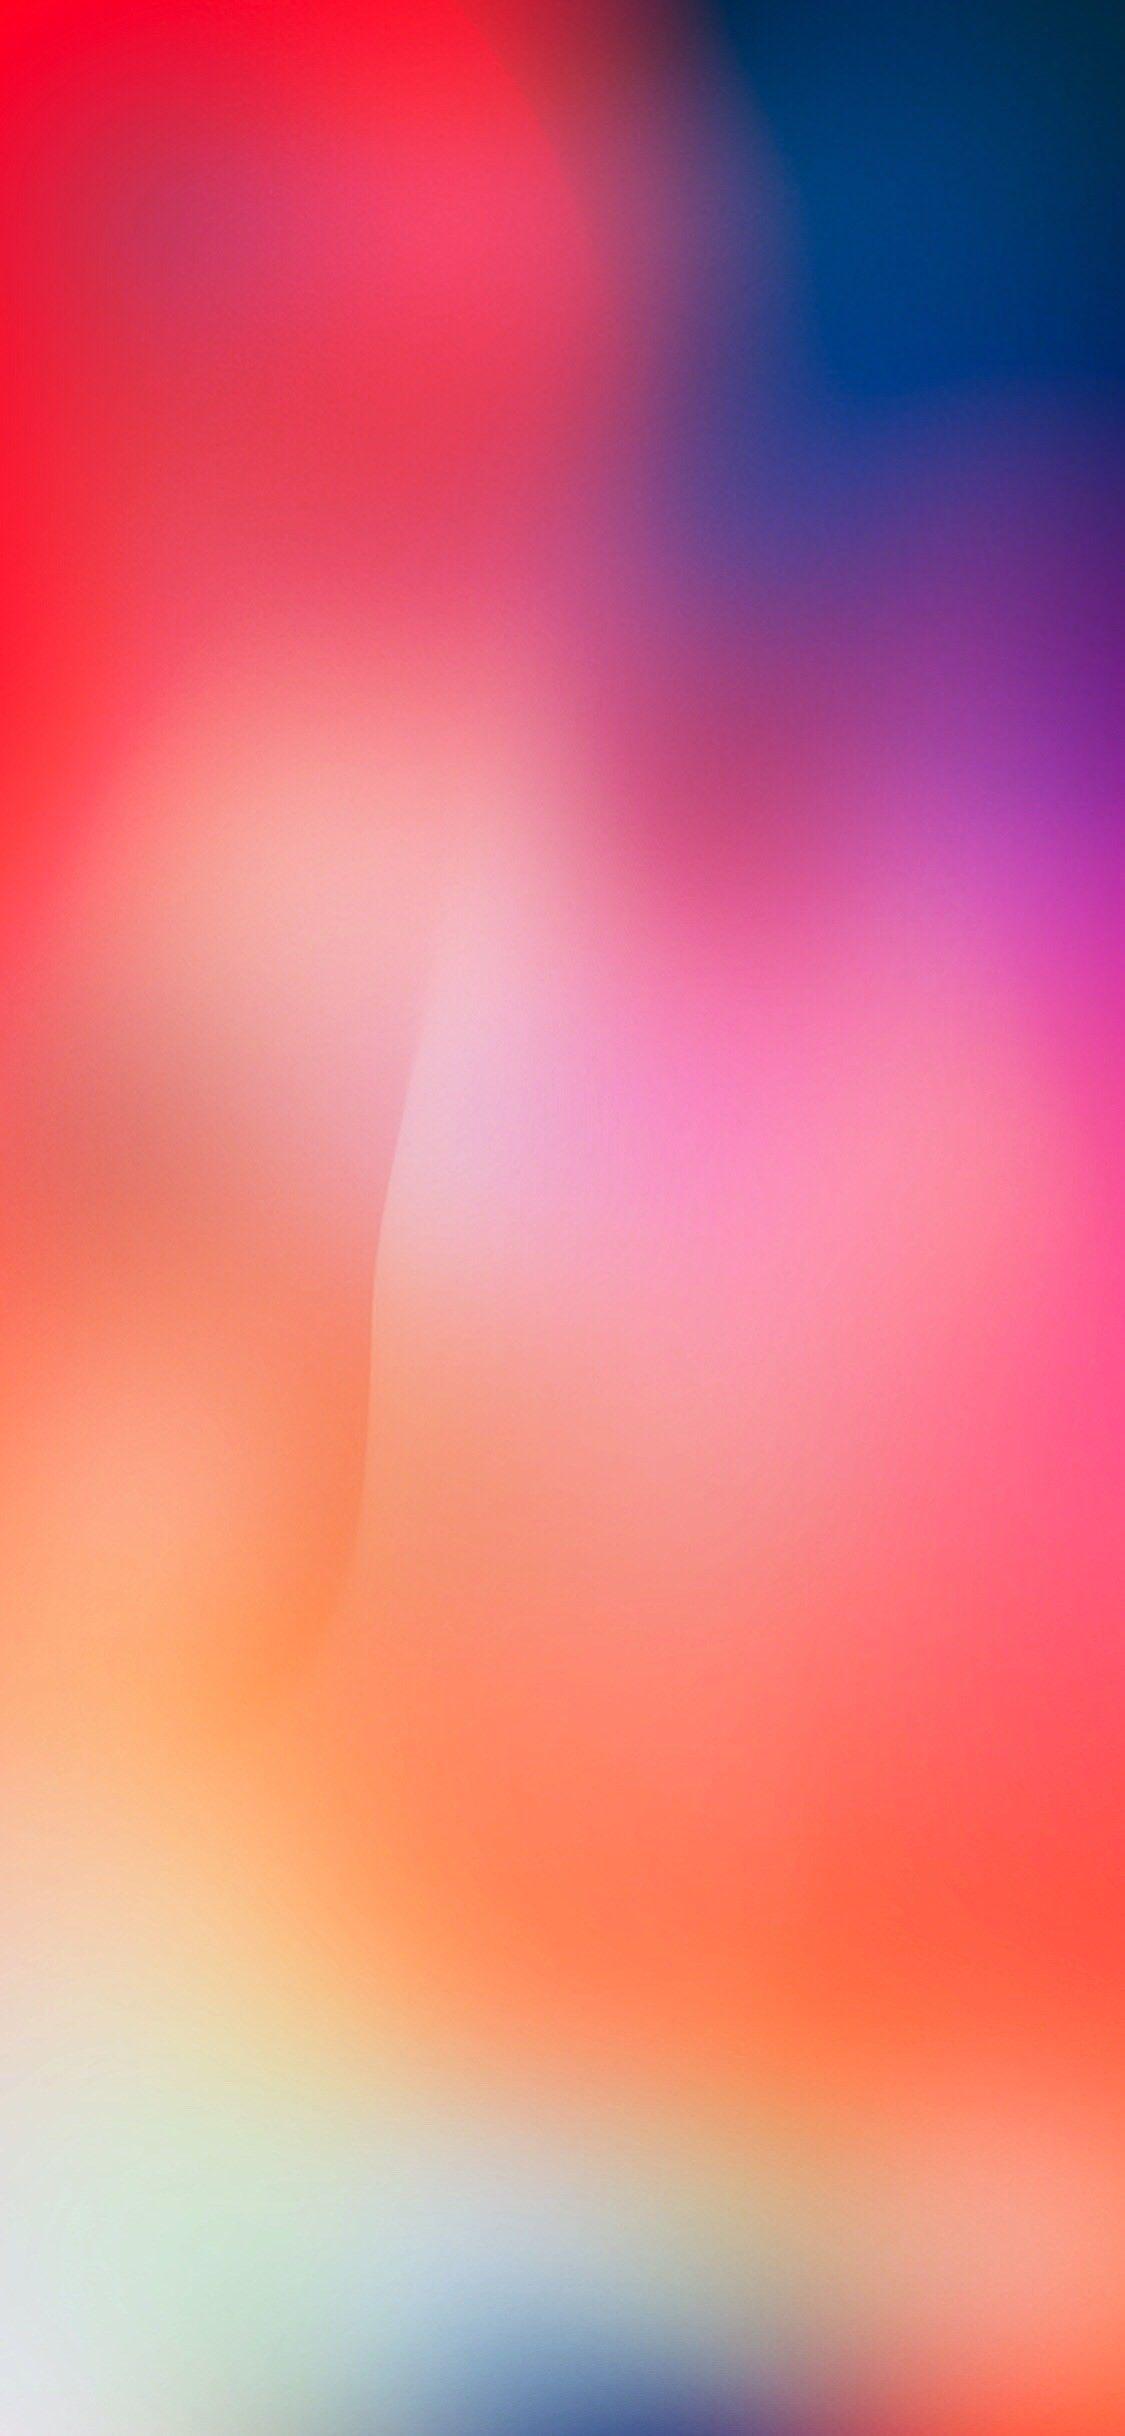 1125X2436 iPhone X Wallpapers - Top Free 1125X2436 iPhone X Backgrounds ...